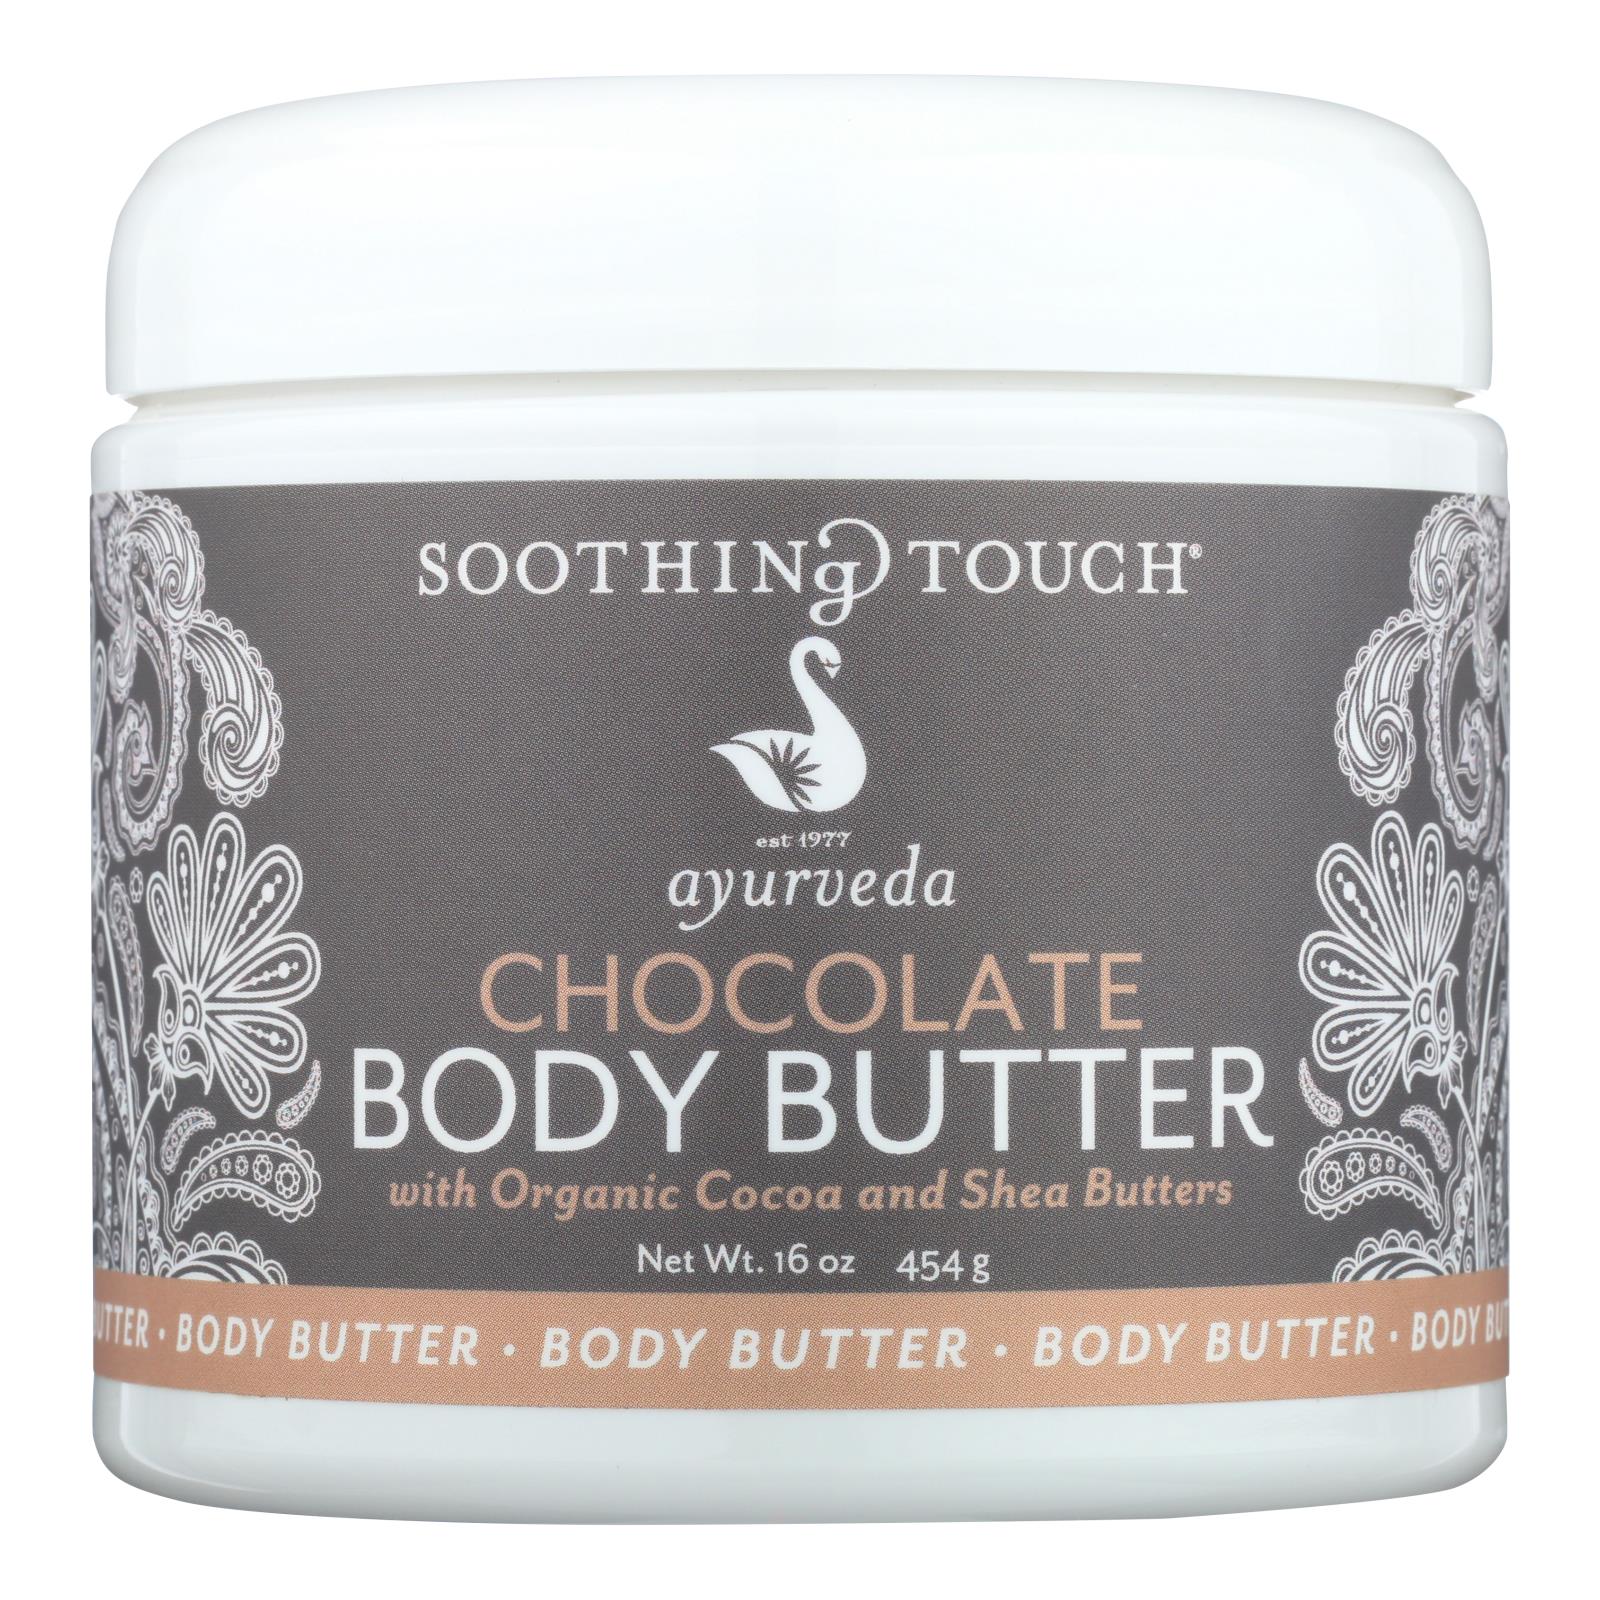 Soothing Touch - Chocolate Body Butter - 16 OZ